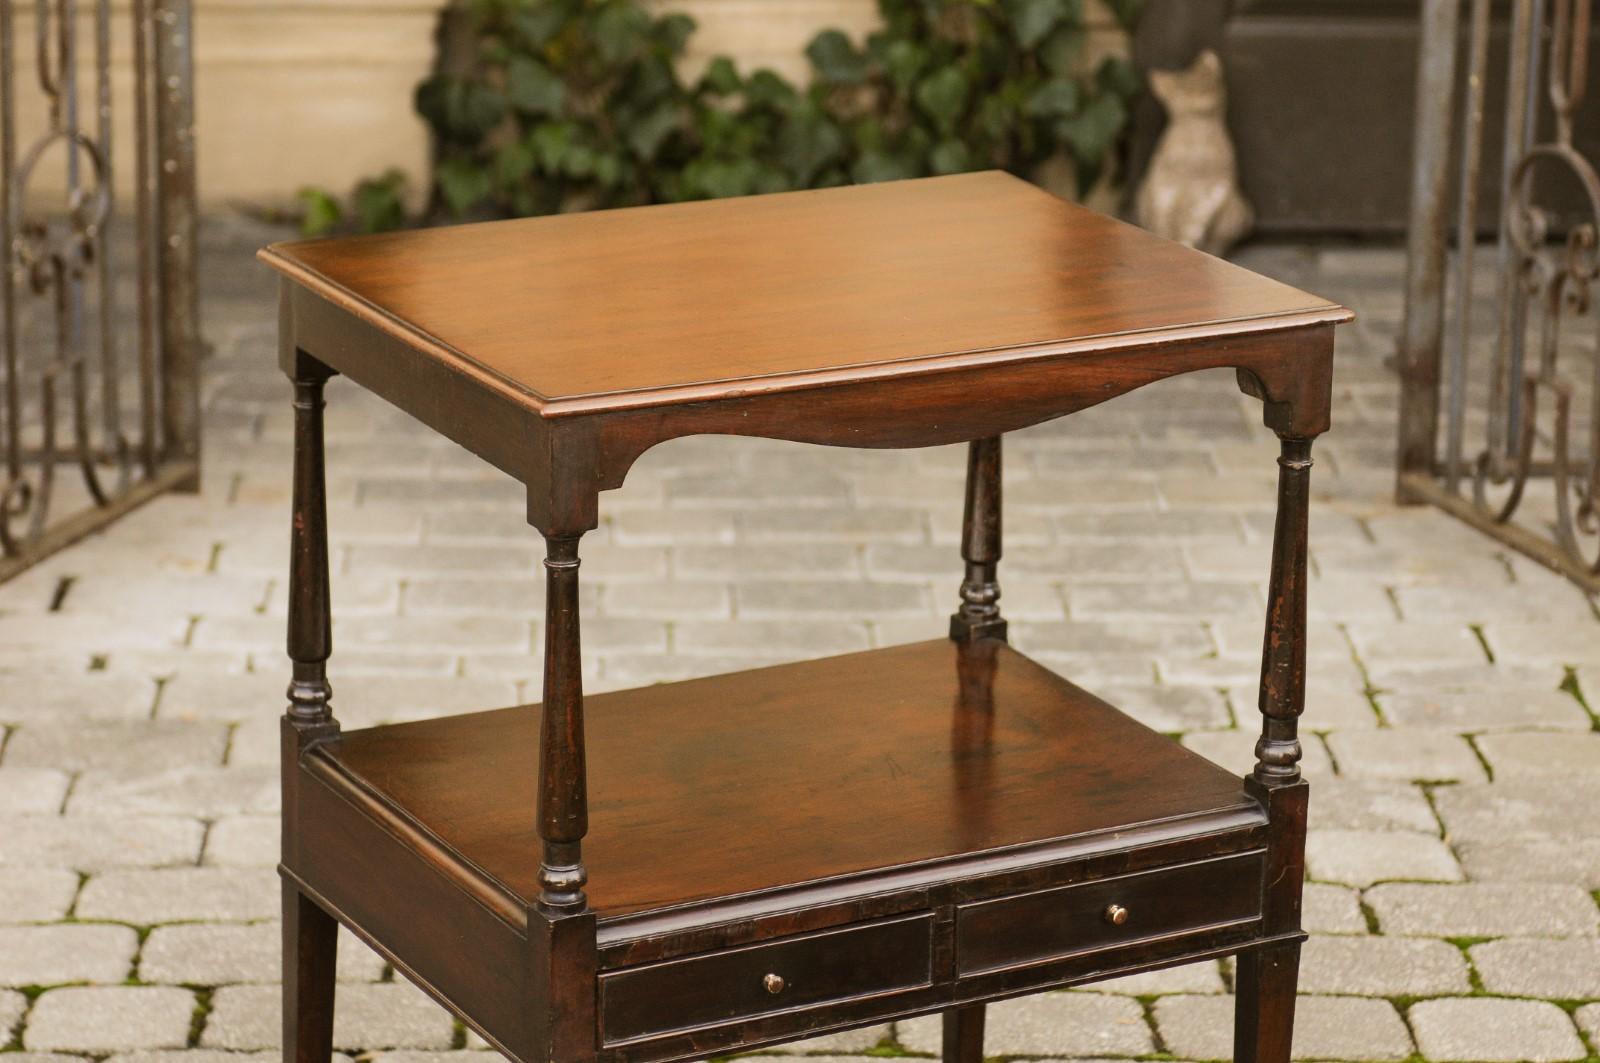 19th Century French 1880s Tiered Mahogany Table with Valanced Apron, Lower Shelf and Drawers